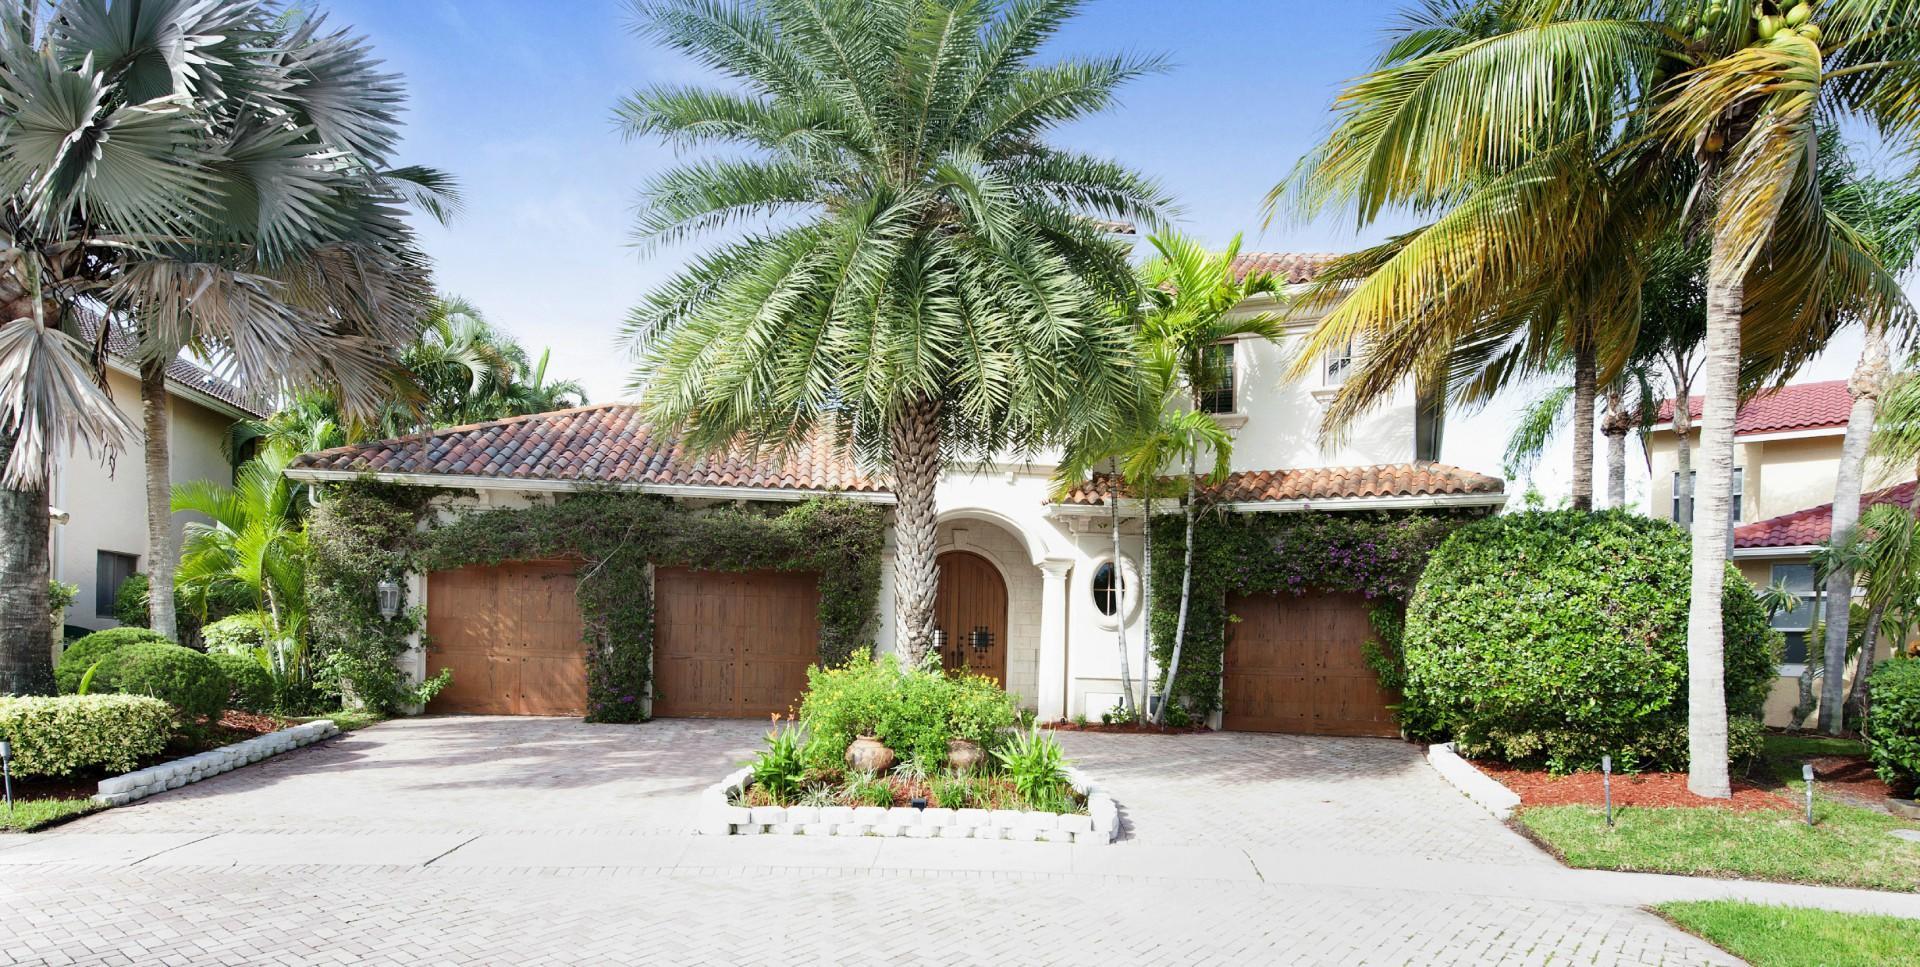 Image of a home in Boca Raton